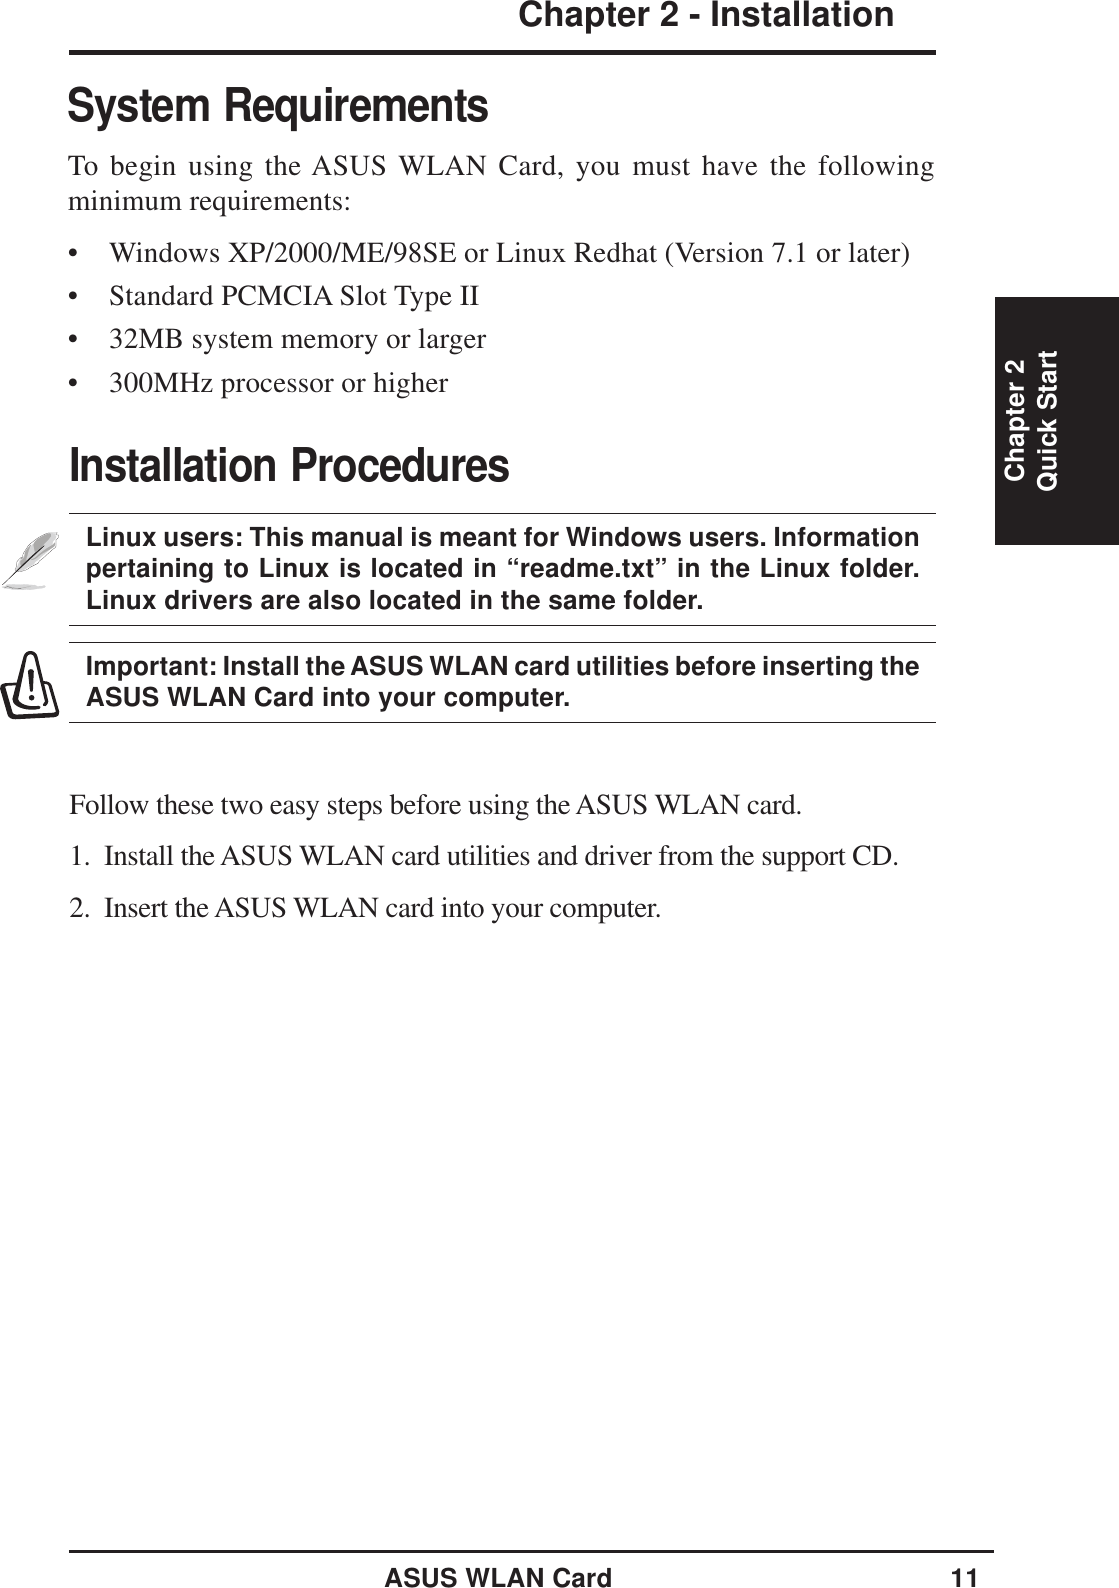 ASUS WLAN Card 11Chapter 2 - InstallationChapter 2Quick StartSystem RequirementsTo begin using the ASUS WLAN Card, you must have the followingminimum requirements:• Windows XP/2000/ME/98SE or Linux Redhat (Version 7.1 or later)• Standard PCMCIA Slot Type II• 32MB system memory or larger• 300MHz processor or higherInstallation ProceduresLinux users: This manual is meant for Windows users. Informationpertaining to Linux is located in “readme.txt” in the Linux folder.Linux drivers are also located in the same folder.Important: Install the ASUS WLAN card utilities before inserting theASUS WLAN Card into your computer.Follow these two easy steps before using the ASUS WLAN card.1.  Install the ASUS WLAN card utilities and driver from the support CD.2.  Insert the ASUS WLAN card into your computer.